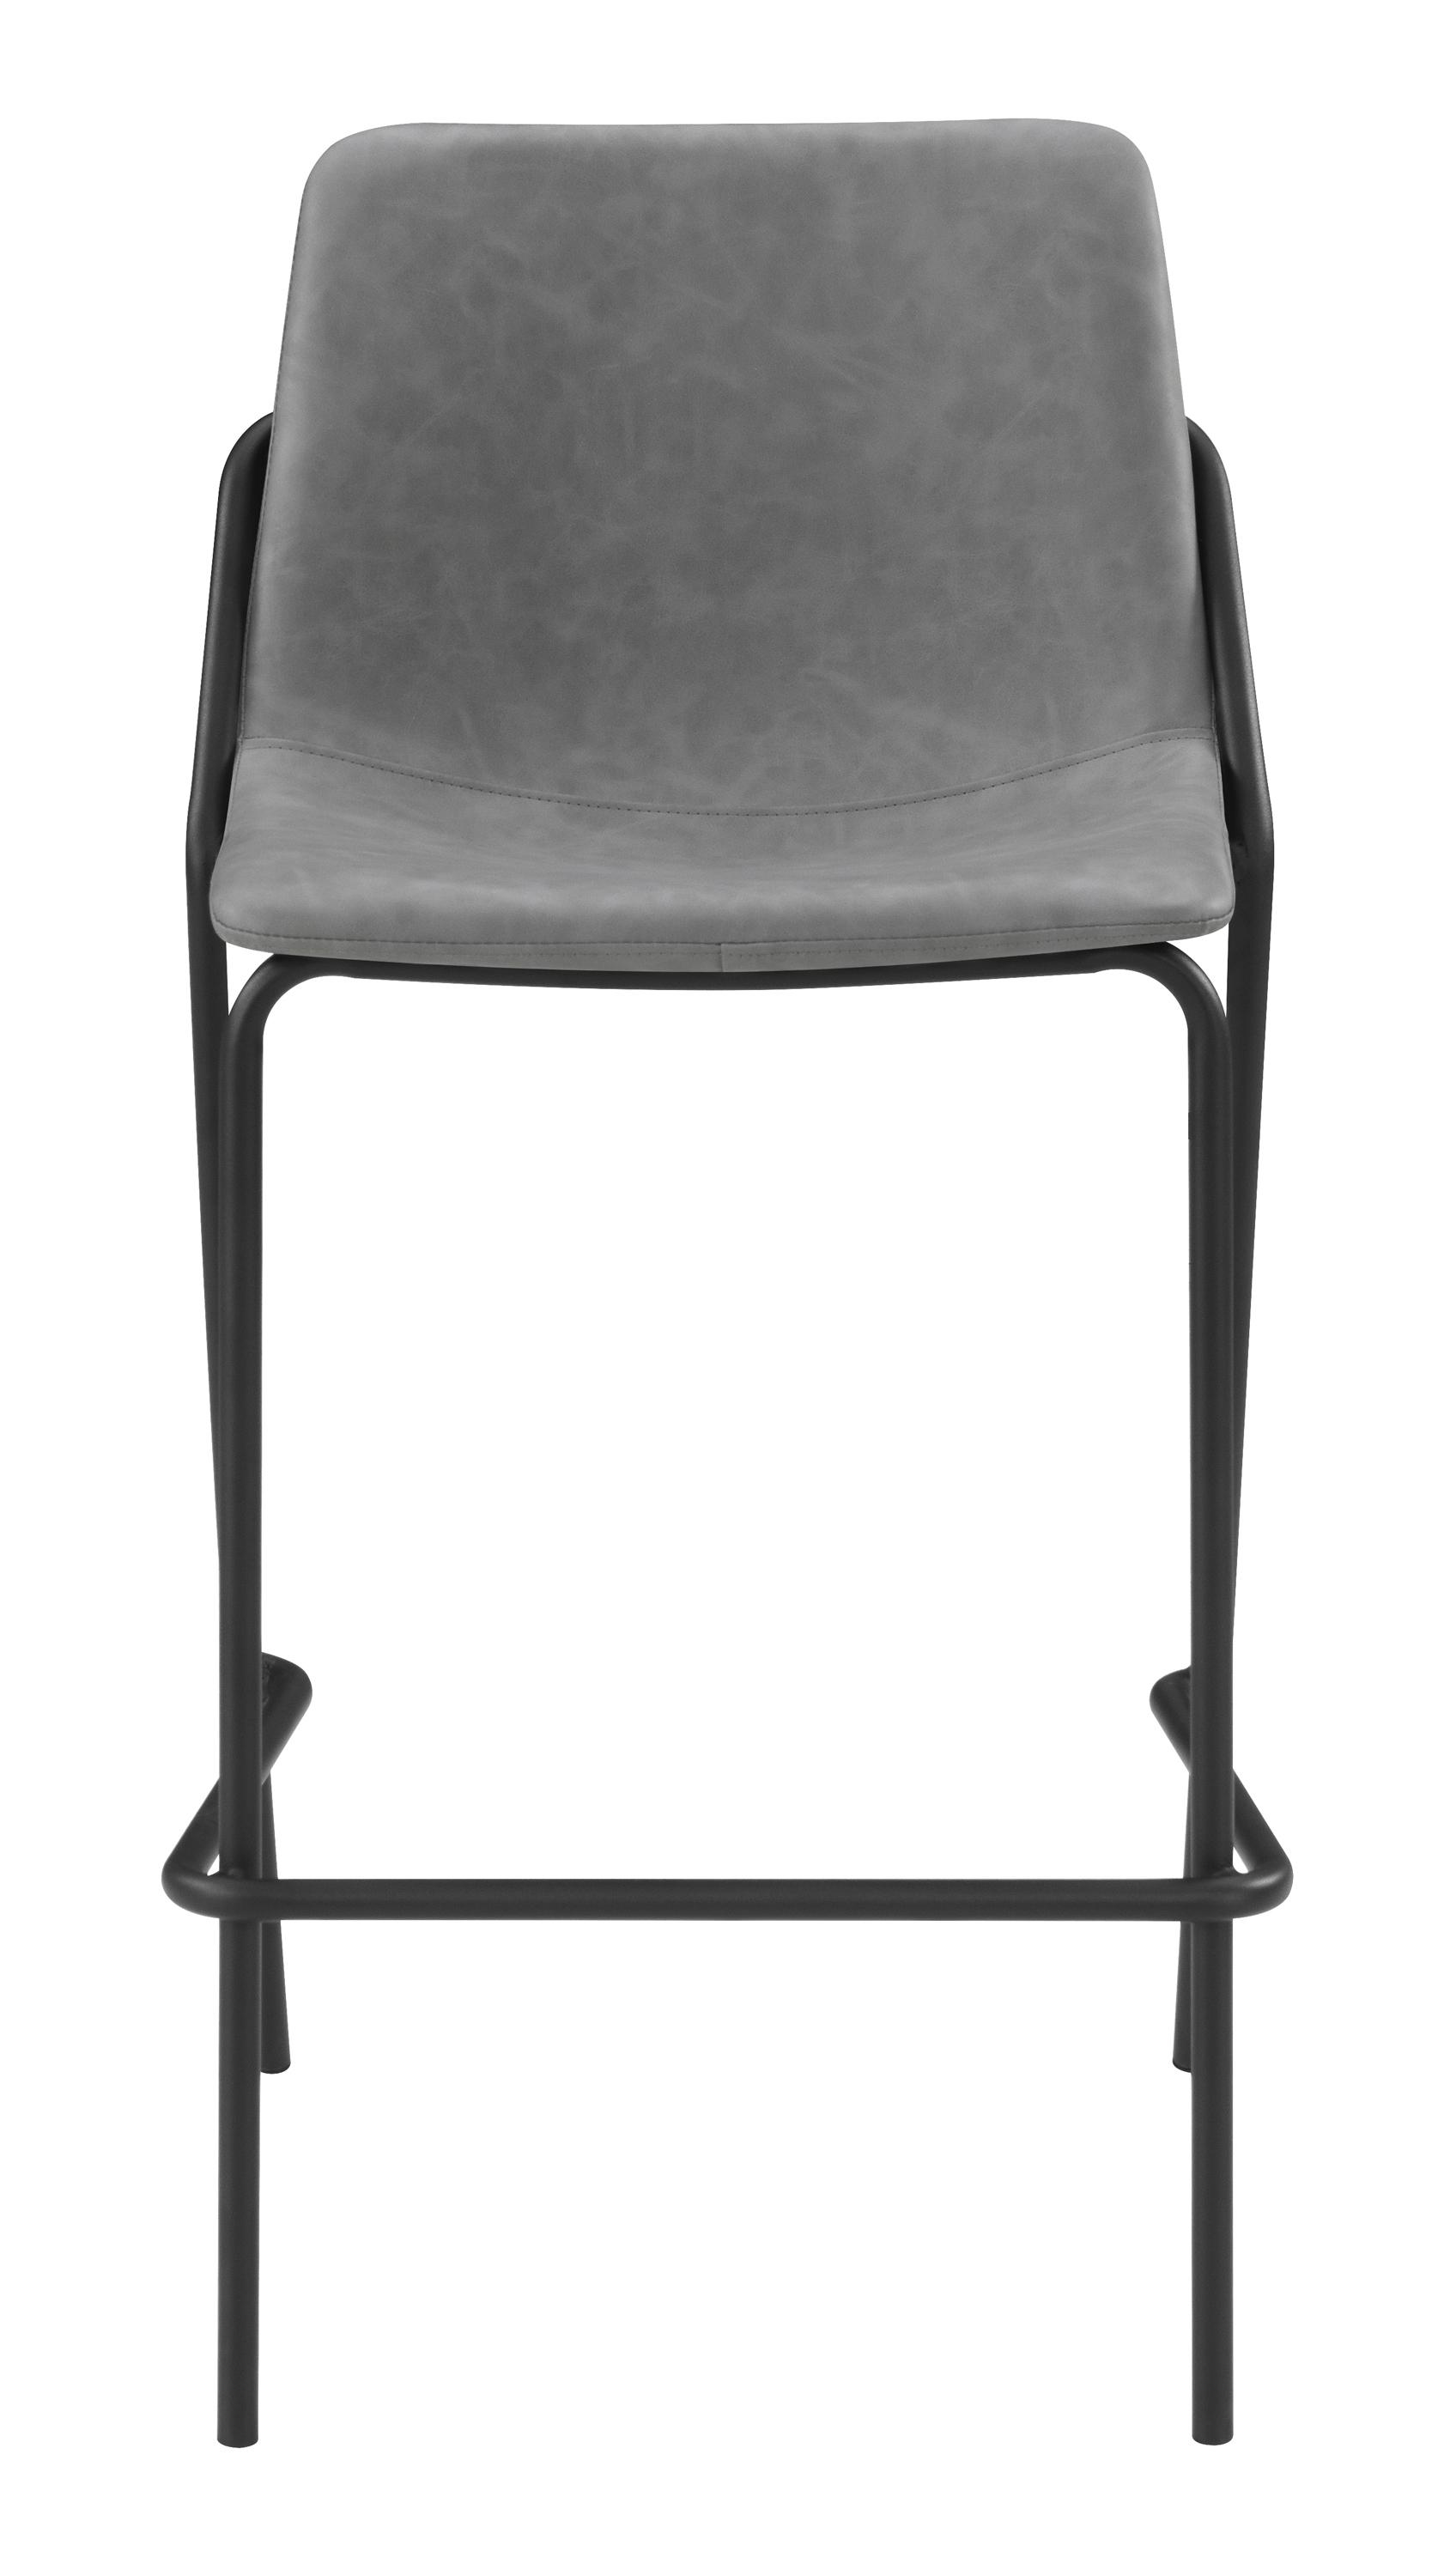 Contemporary Bar Stool Set 183453 183453 in Gray, Black Leatherette